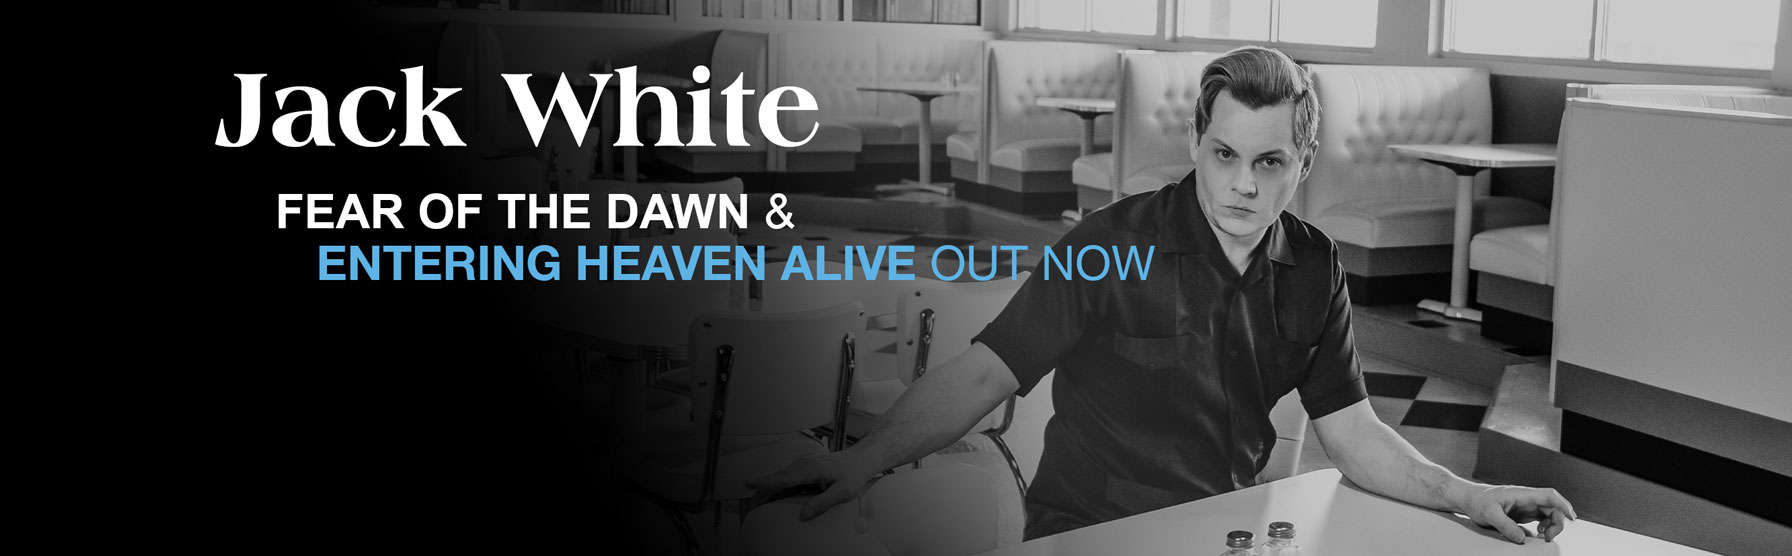 Jack White - Fear of the Dawn & Entering Heaven Alive - Out Now